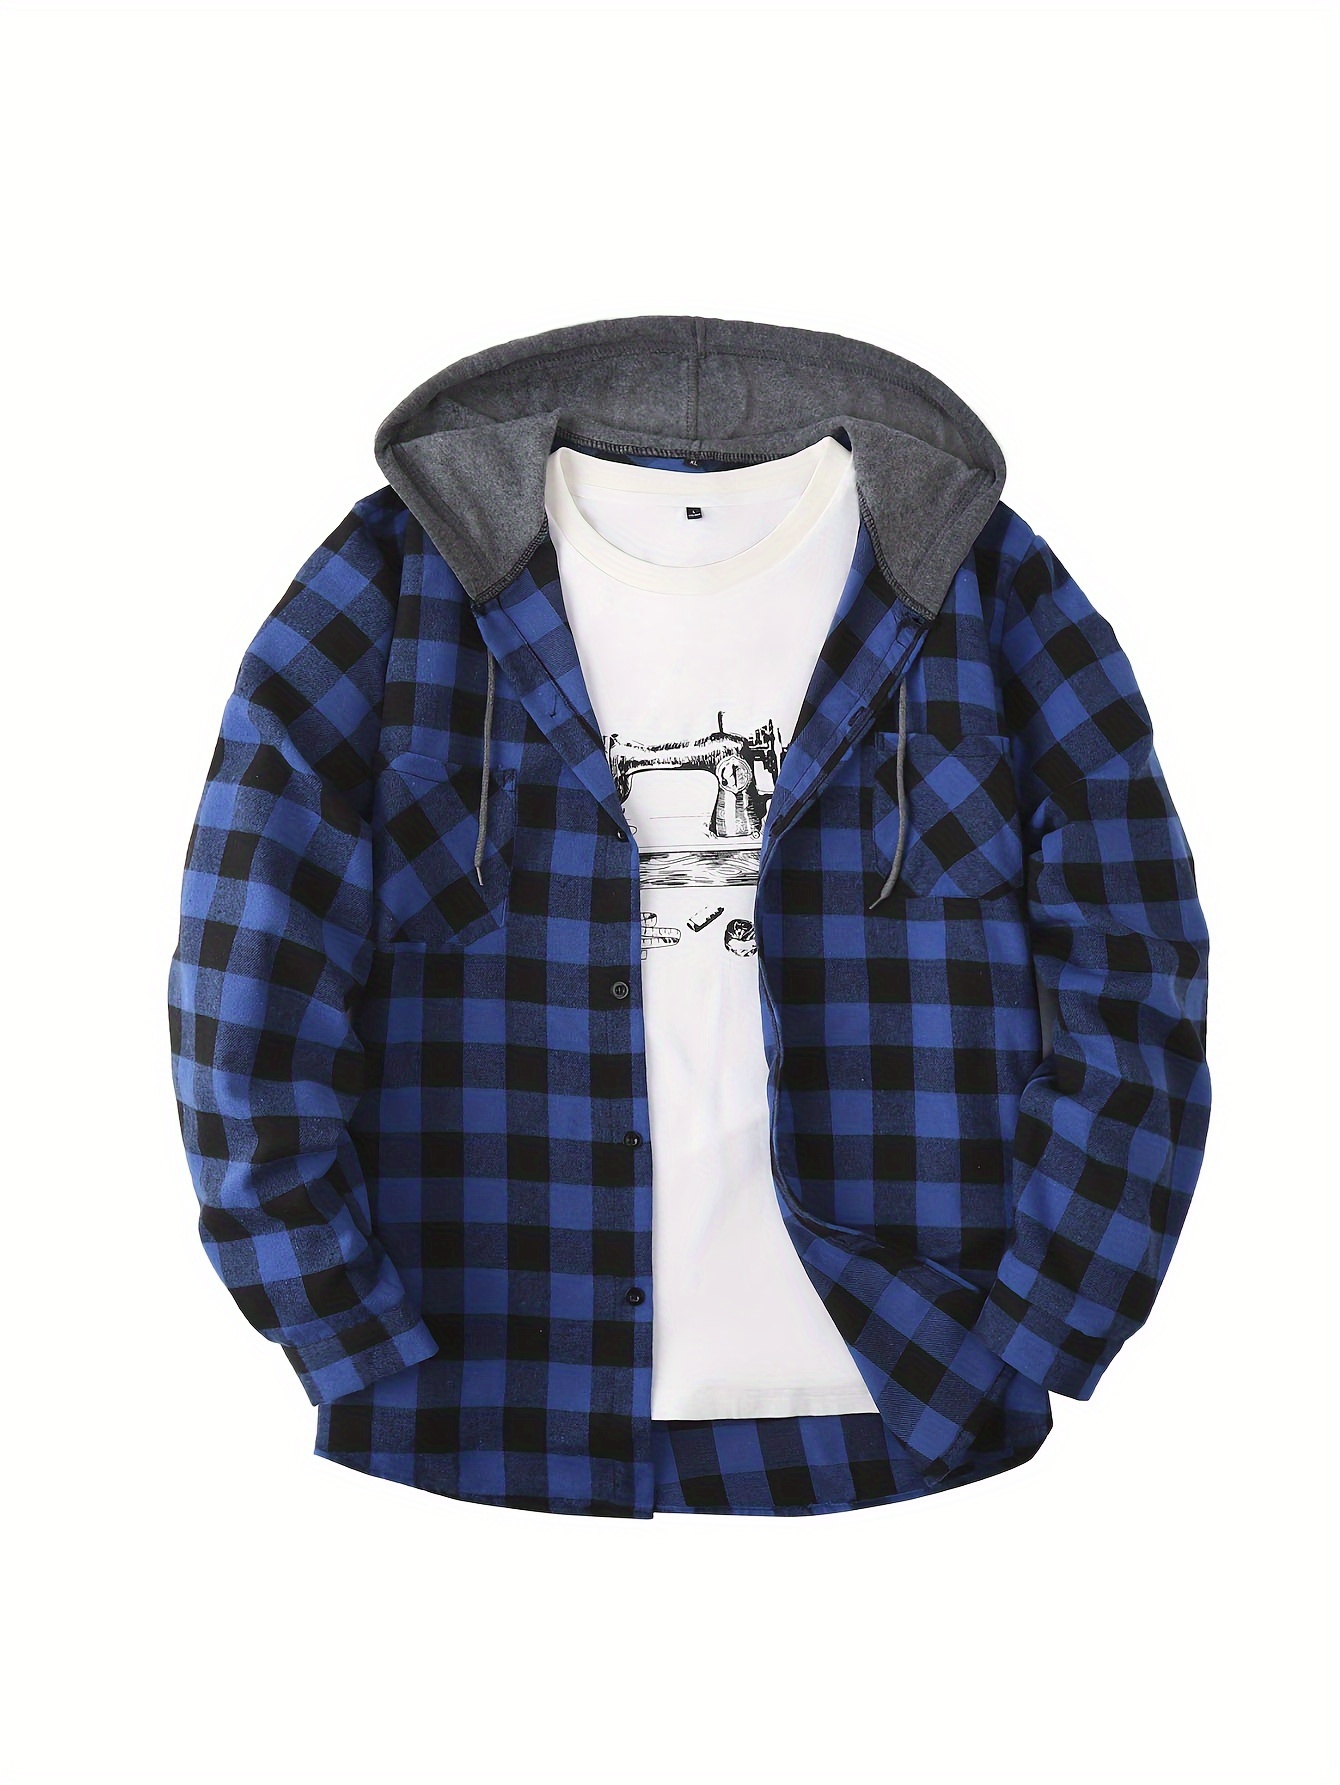 long sleeve casual regular fit button up hooded shirts jacket plaid shirt coat for men details 40